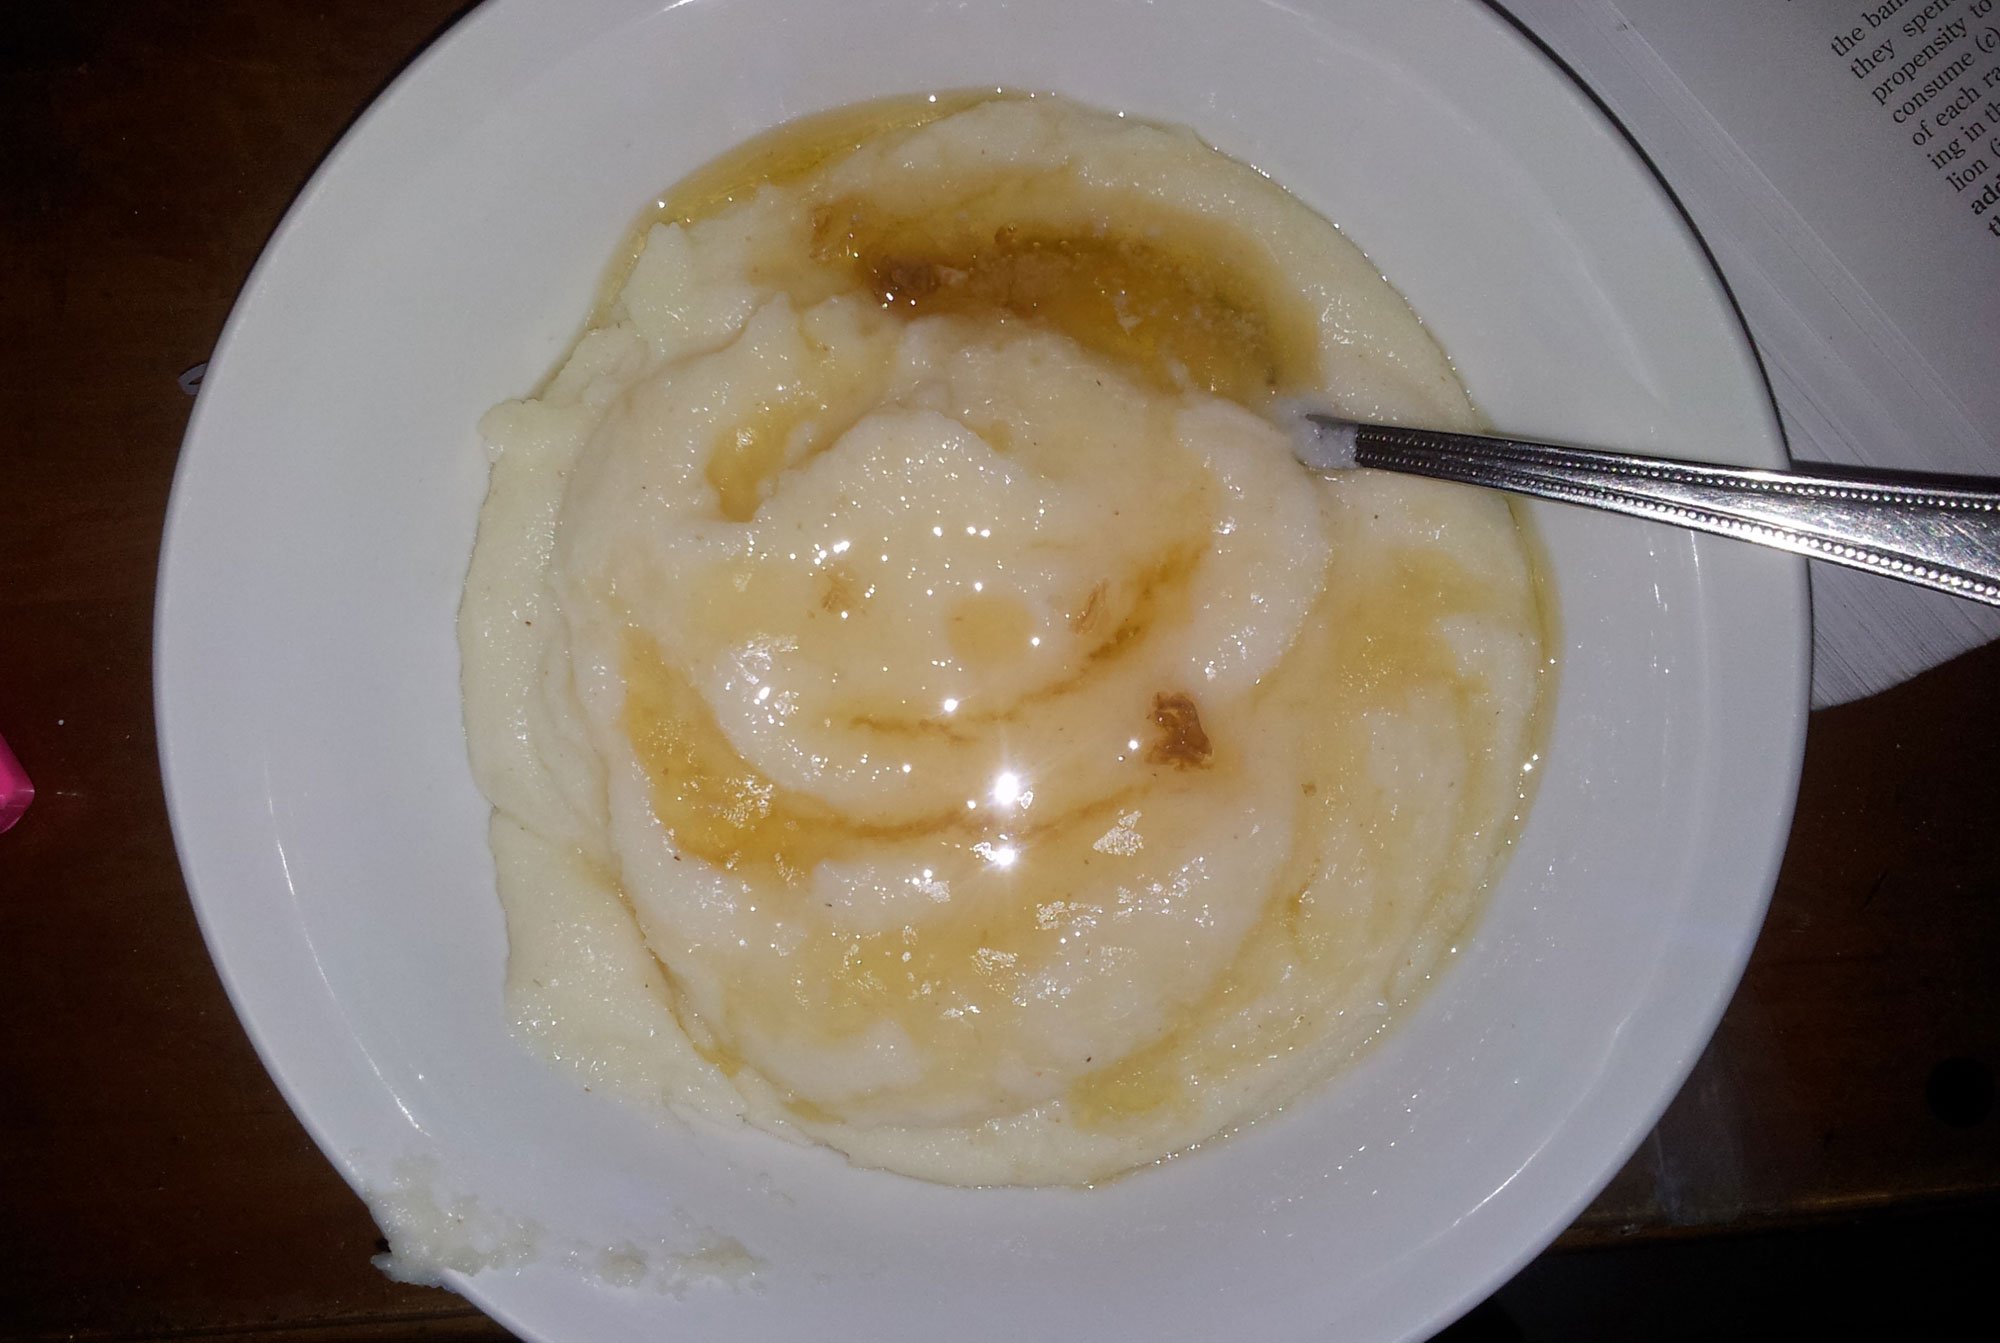 Photograph of a bowl of maize porridge from South Africa. The photo shows a white bowl filled with porridge that appears to have syrup on it. A spoon is resting in the porridge.